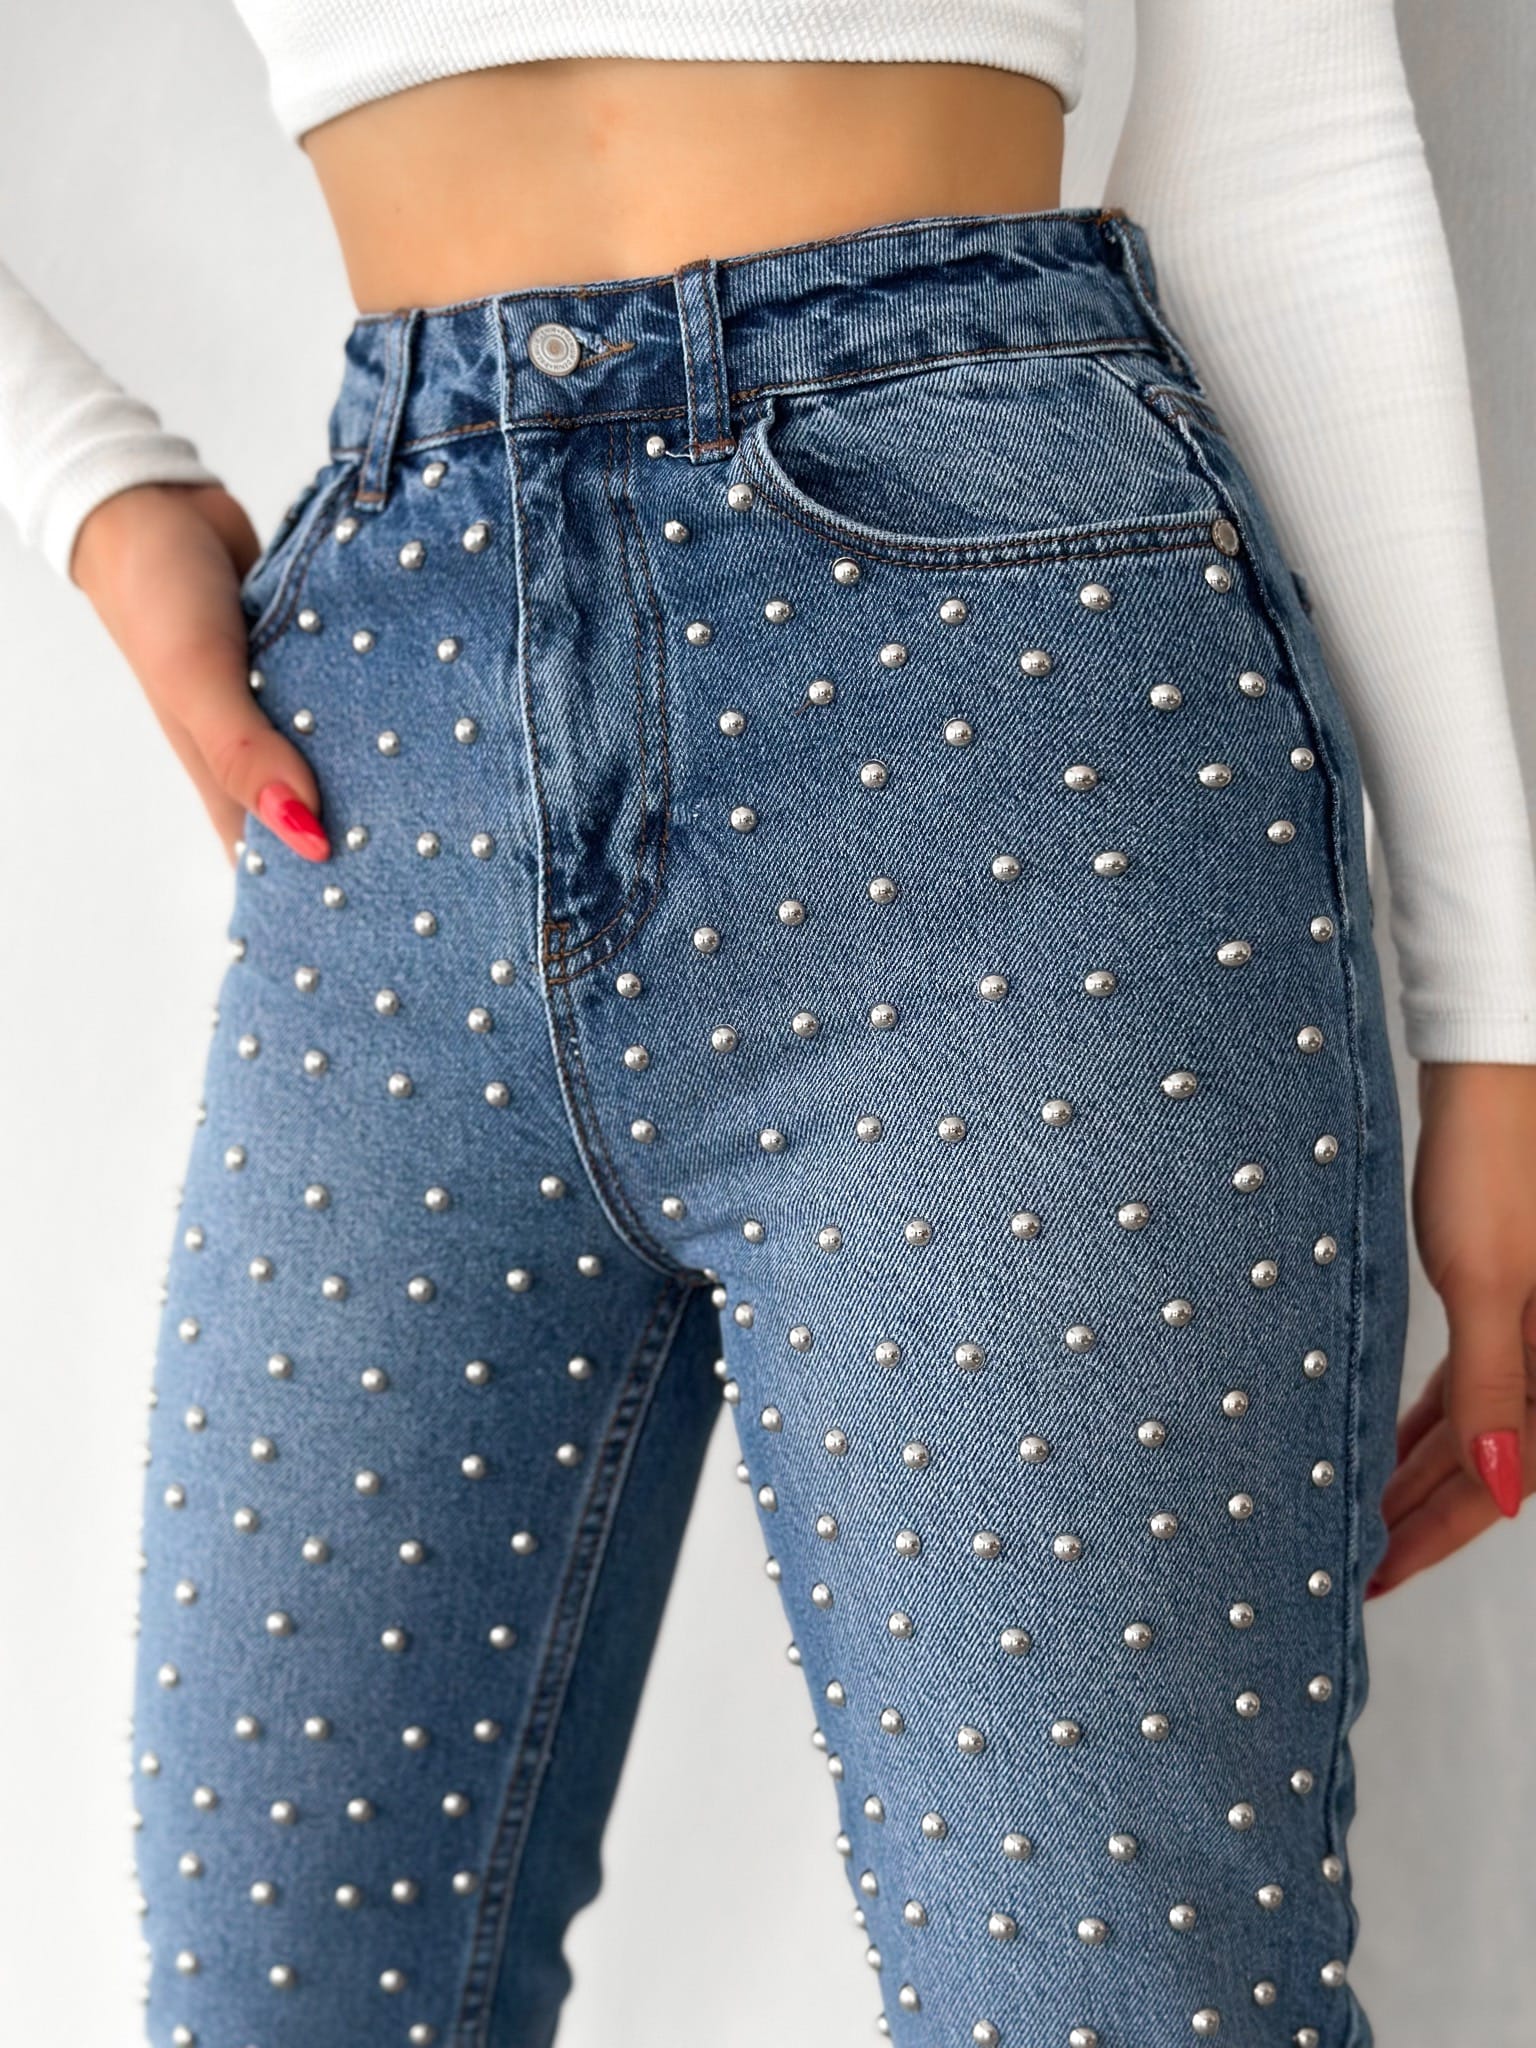 Stylish Beaded Skinny Jeans for a Fashion-Forward Look | Shop Now